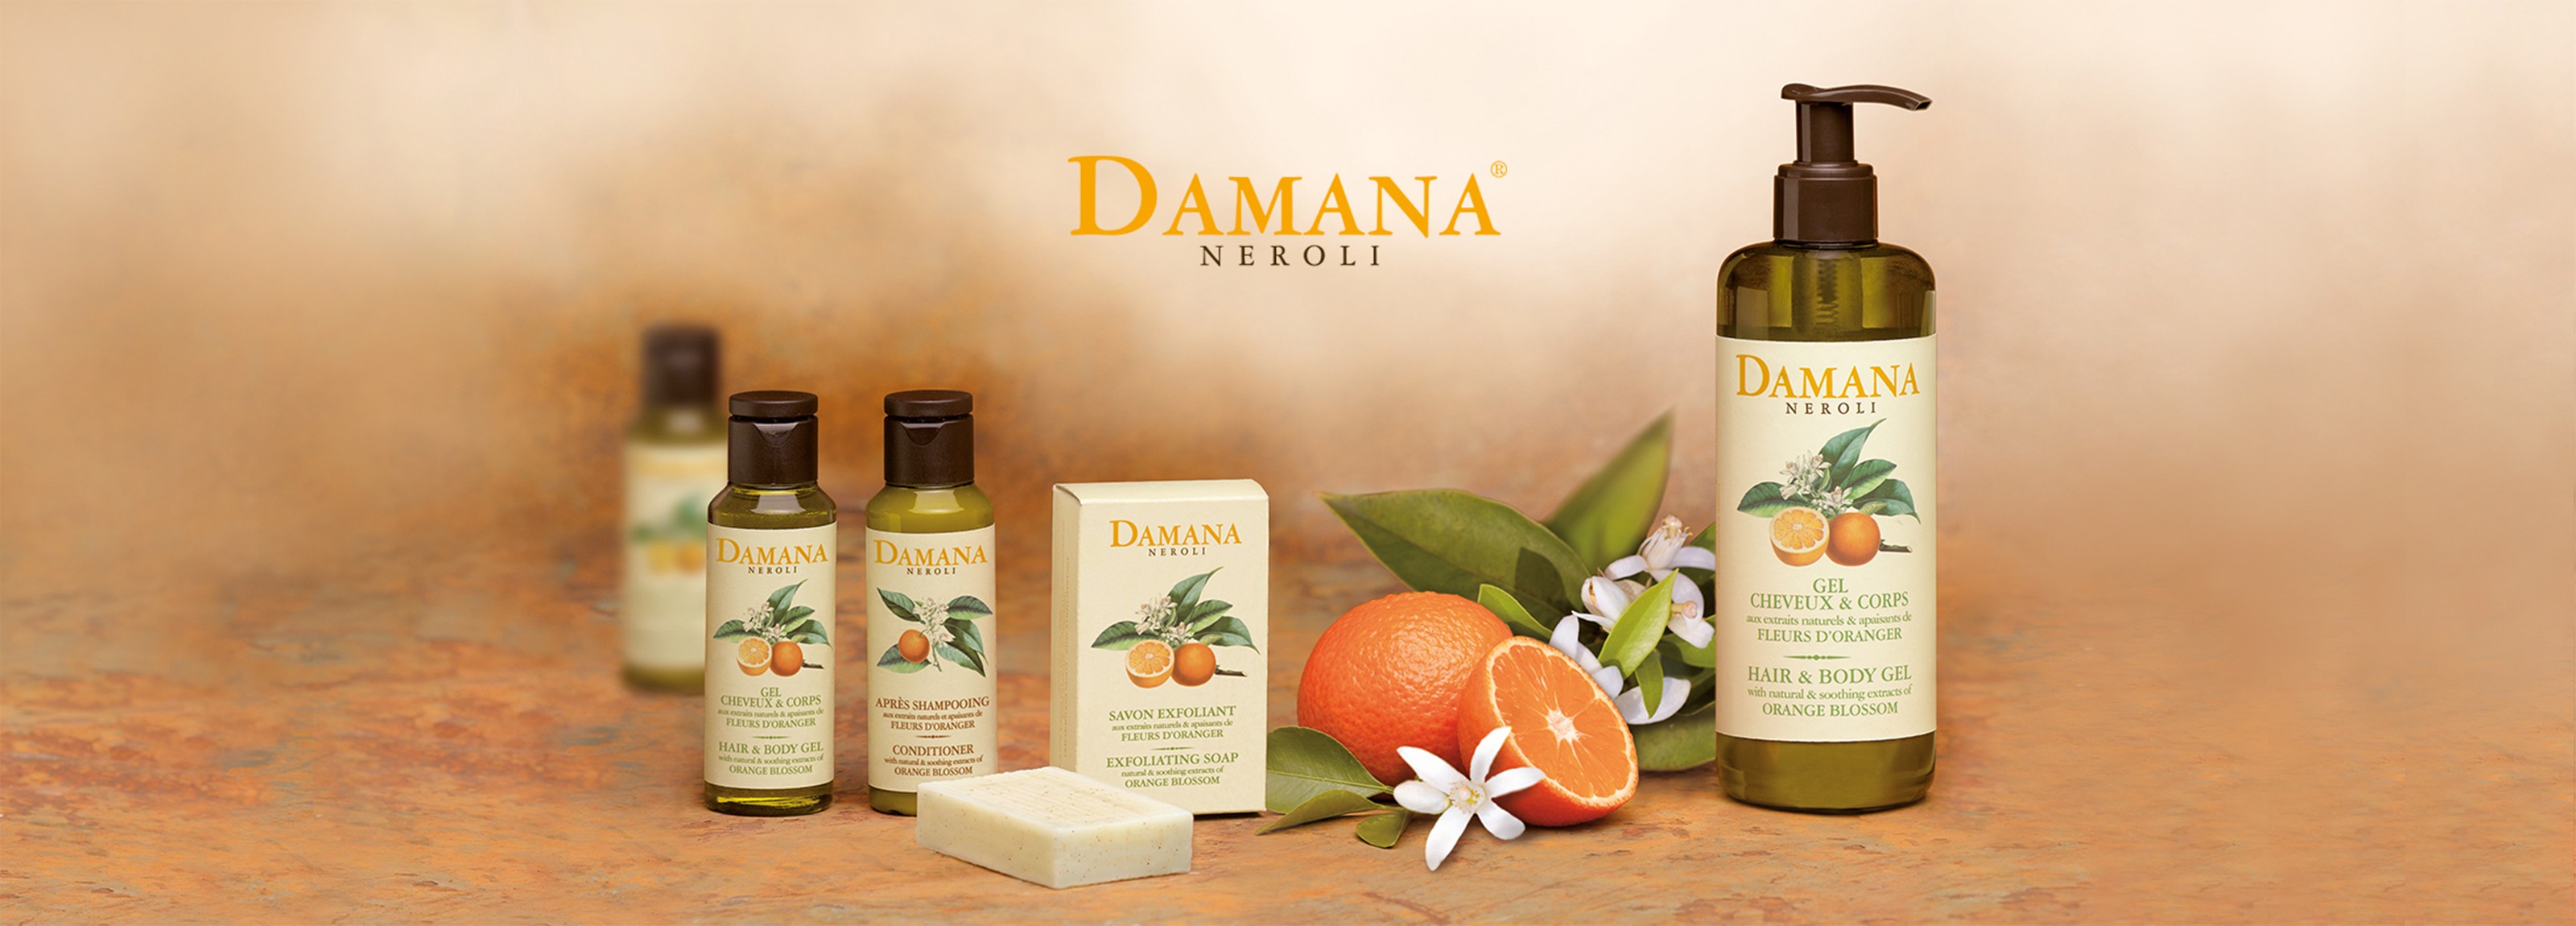 néroli damana hair and body gel soap conditioner products